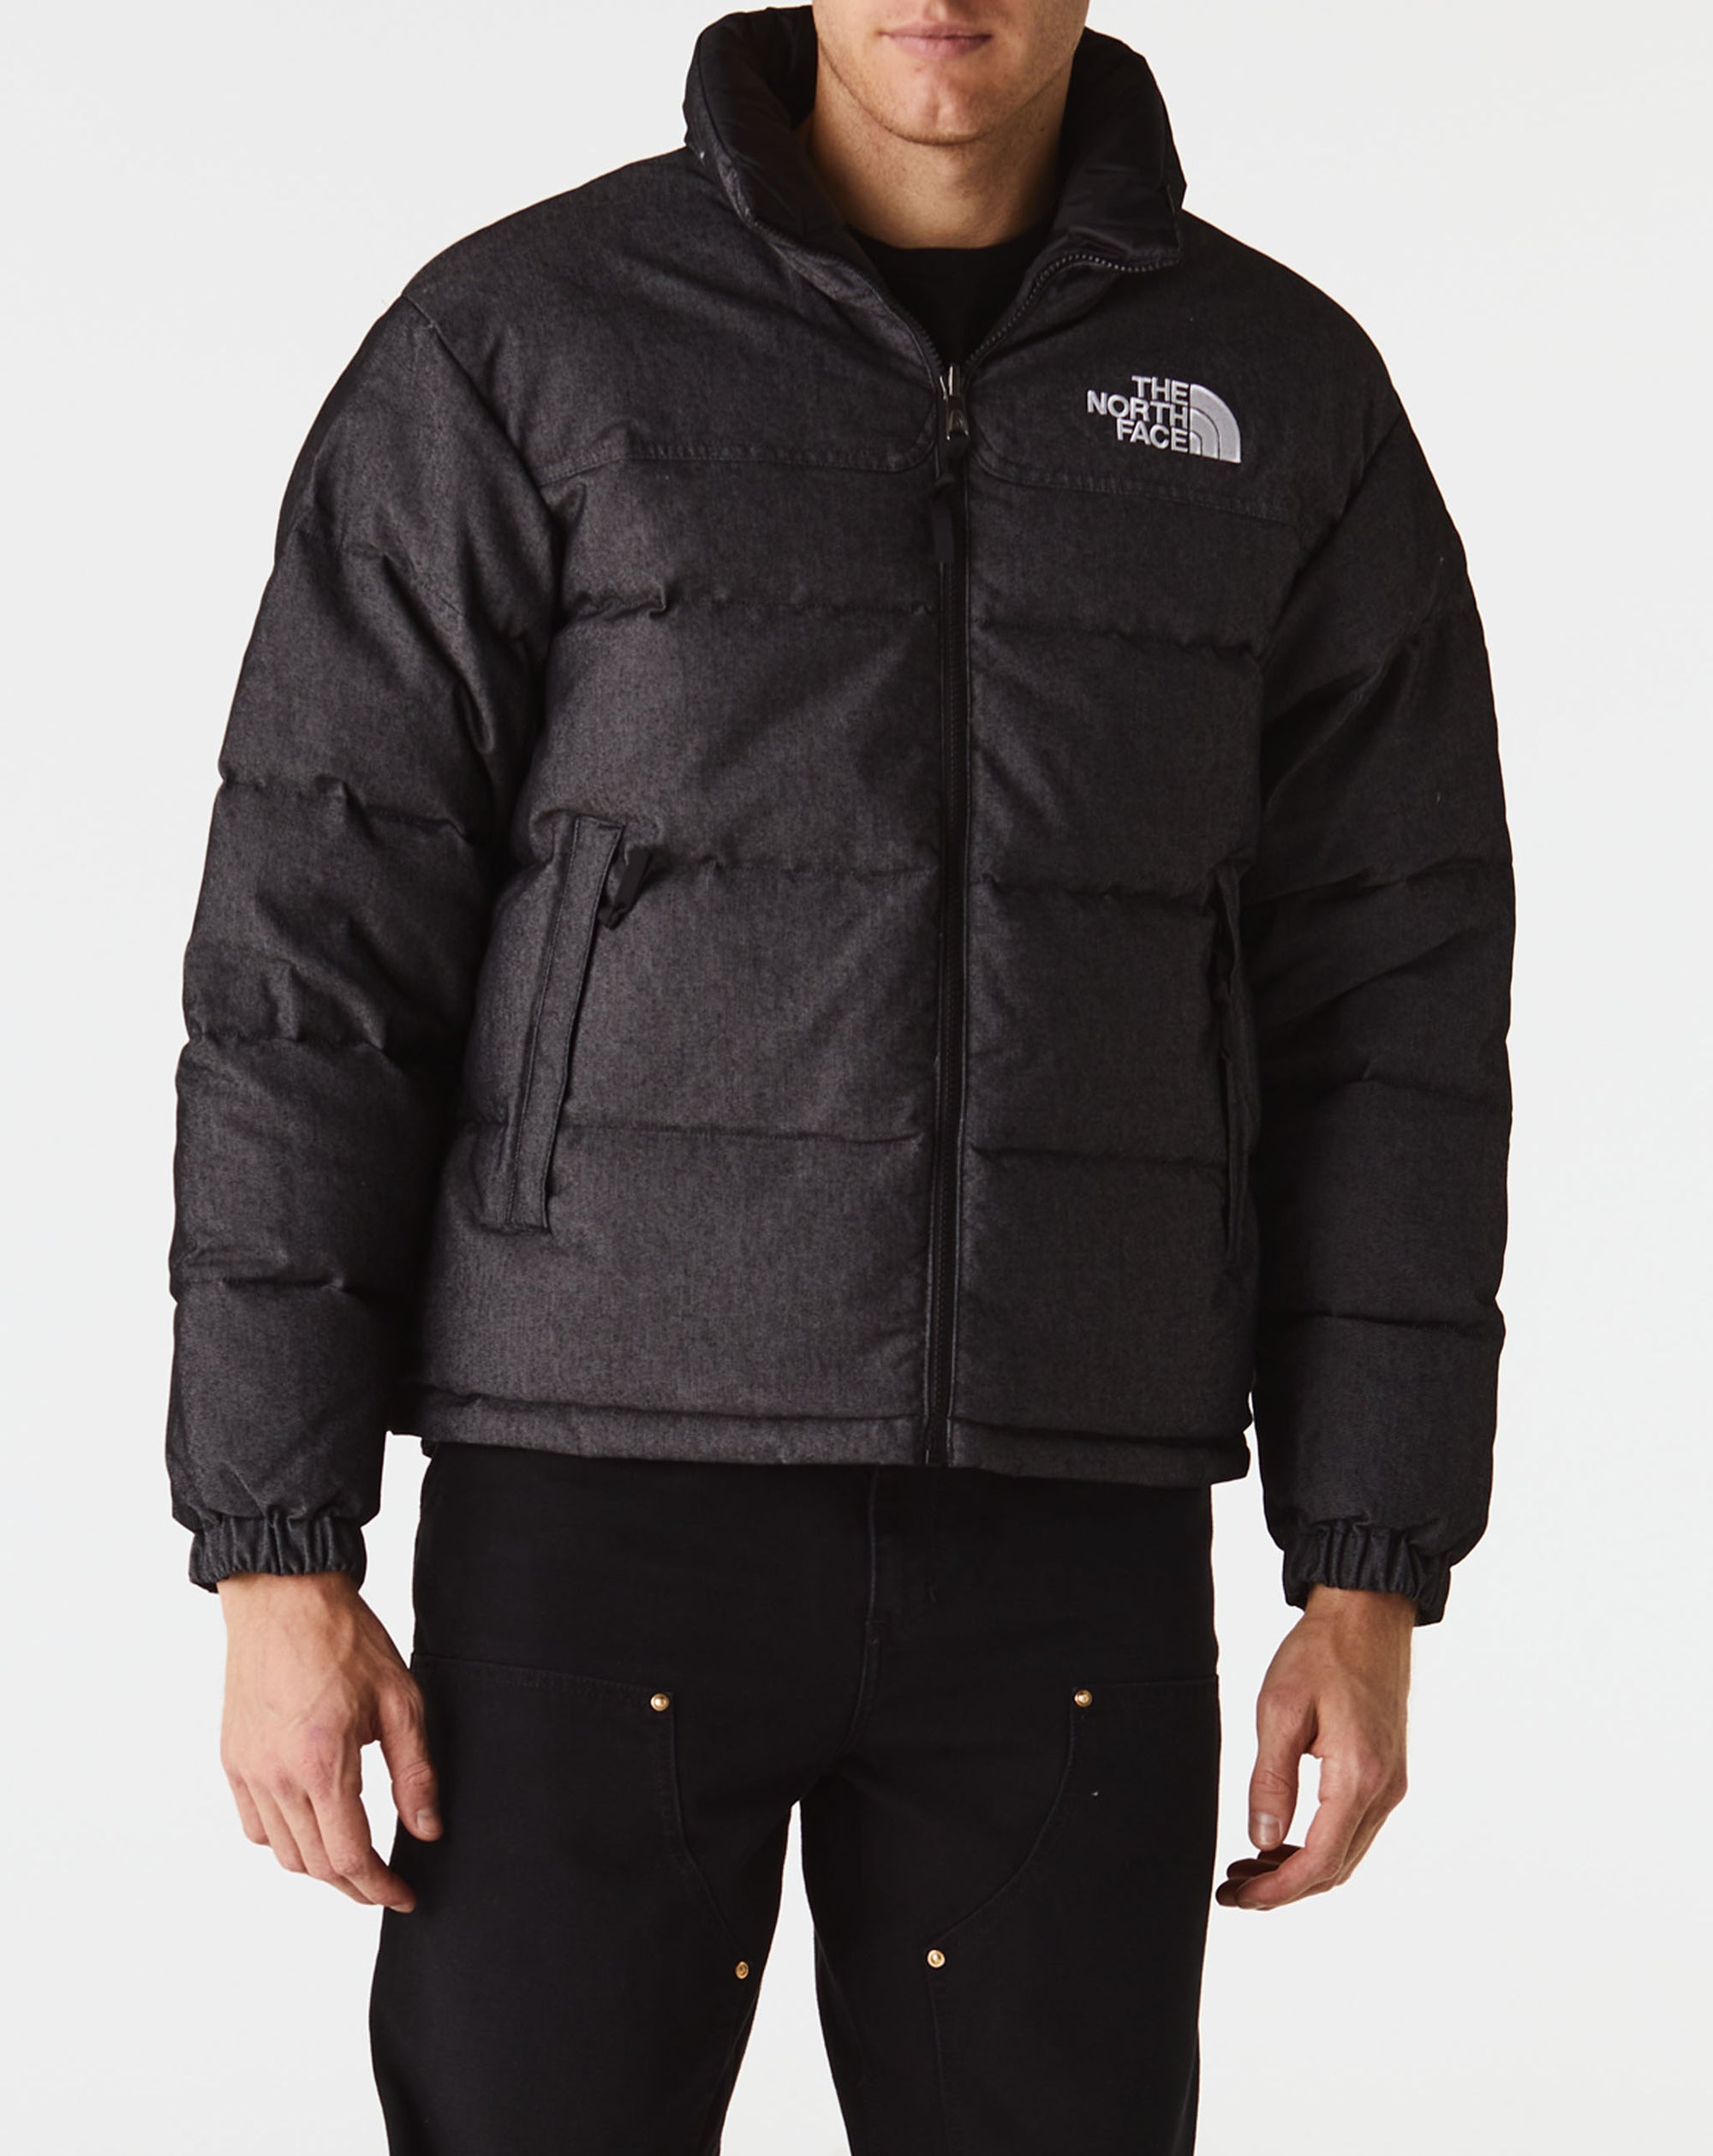 The North Face 92 Reversible Nuptse Jacket - Rule of Next Apparel